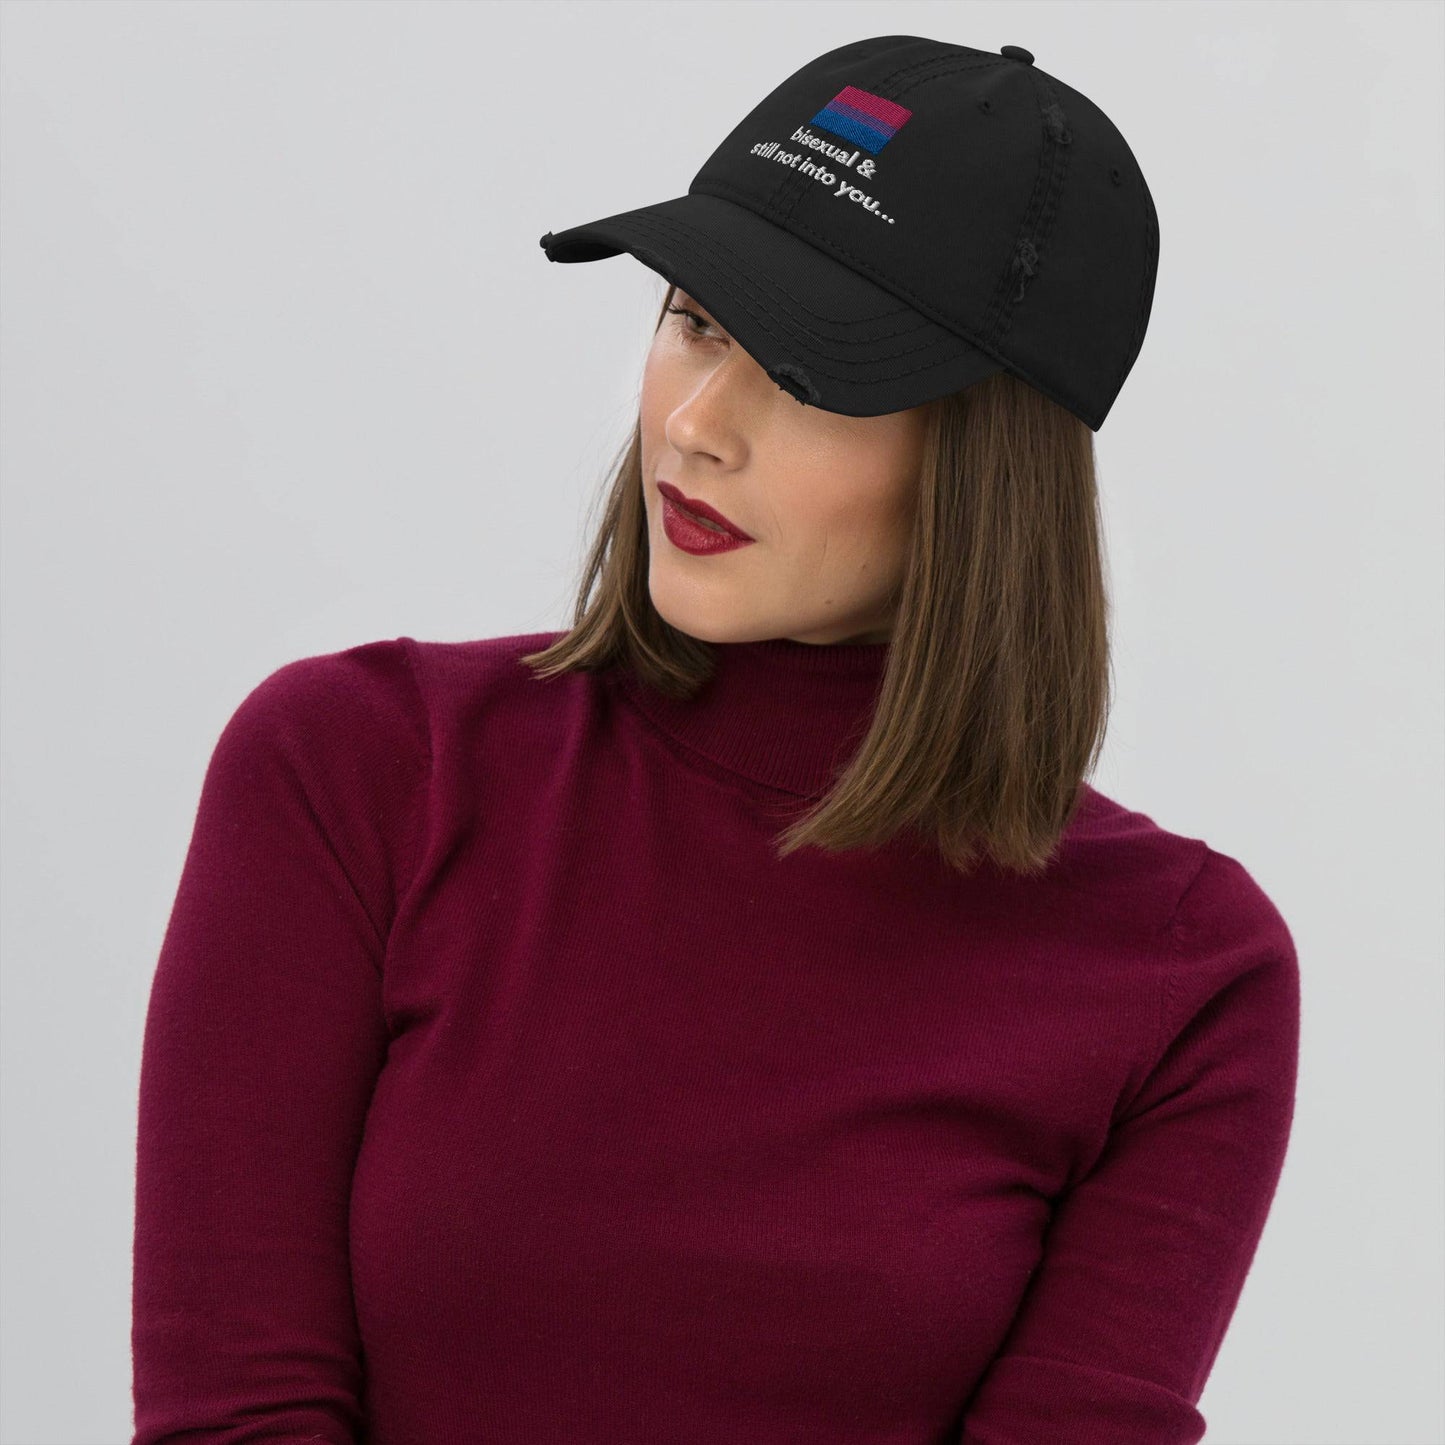 Bisexual & Still Not Into You Pride Flag Hat - Rose Gold Co. Shop